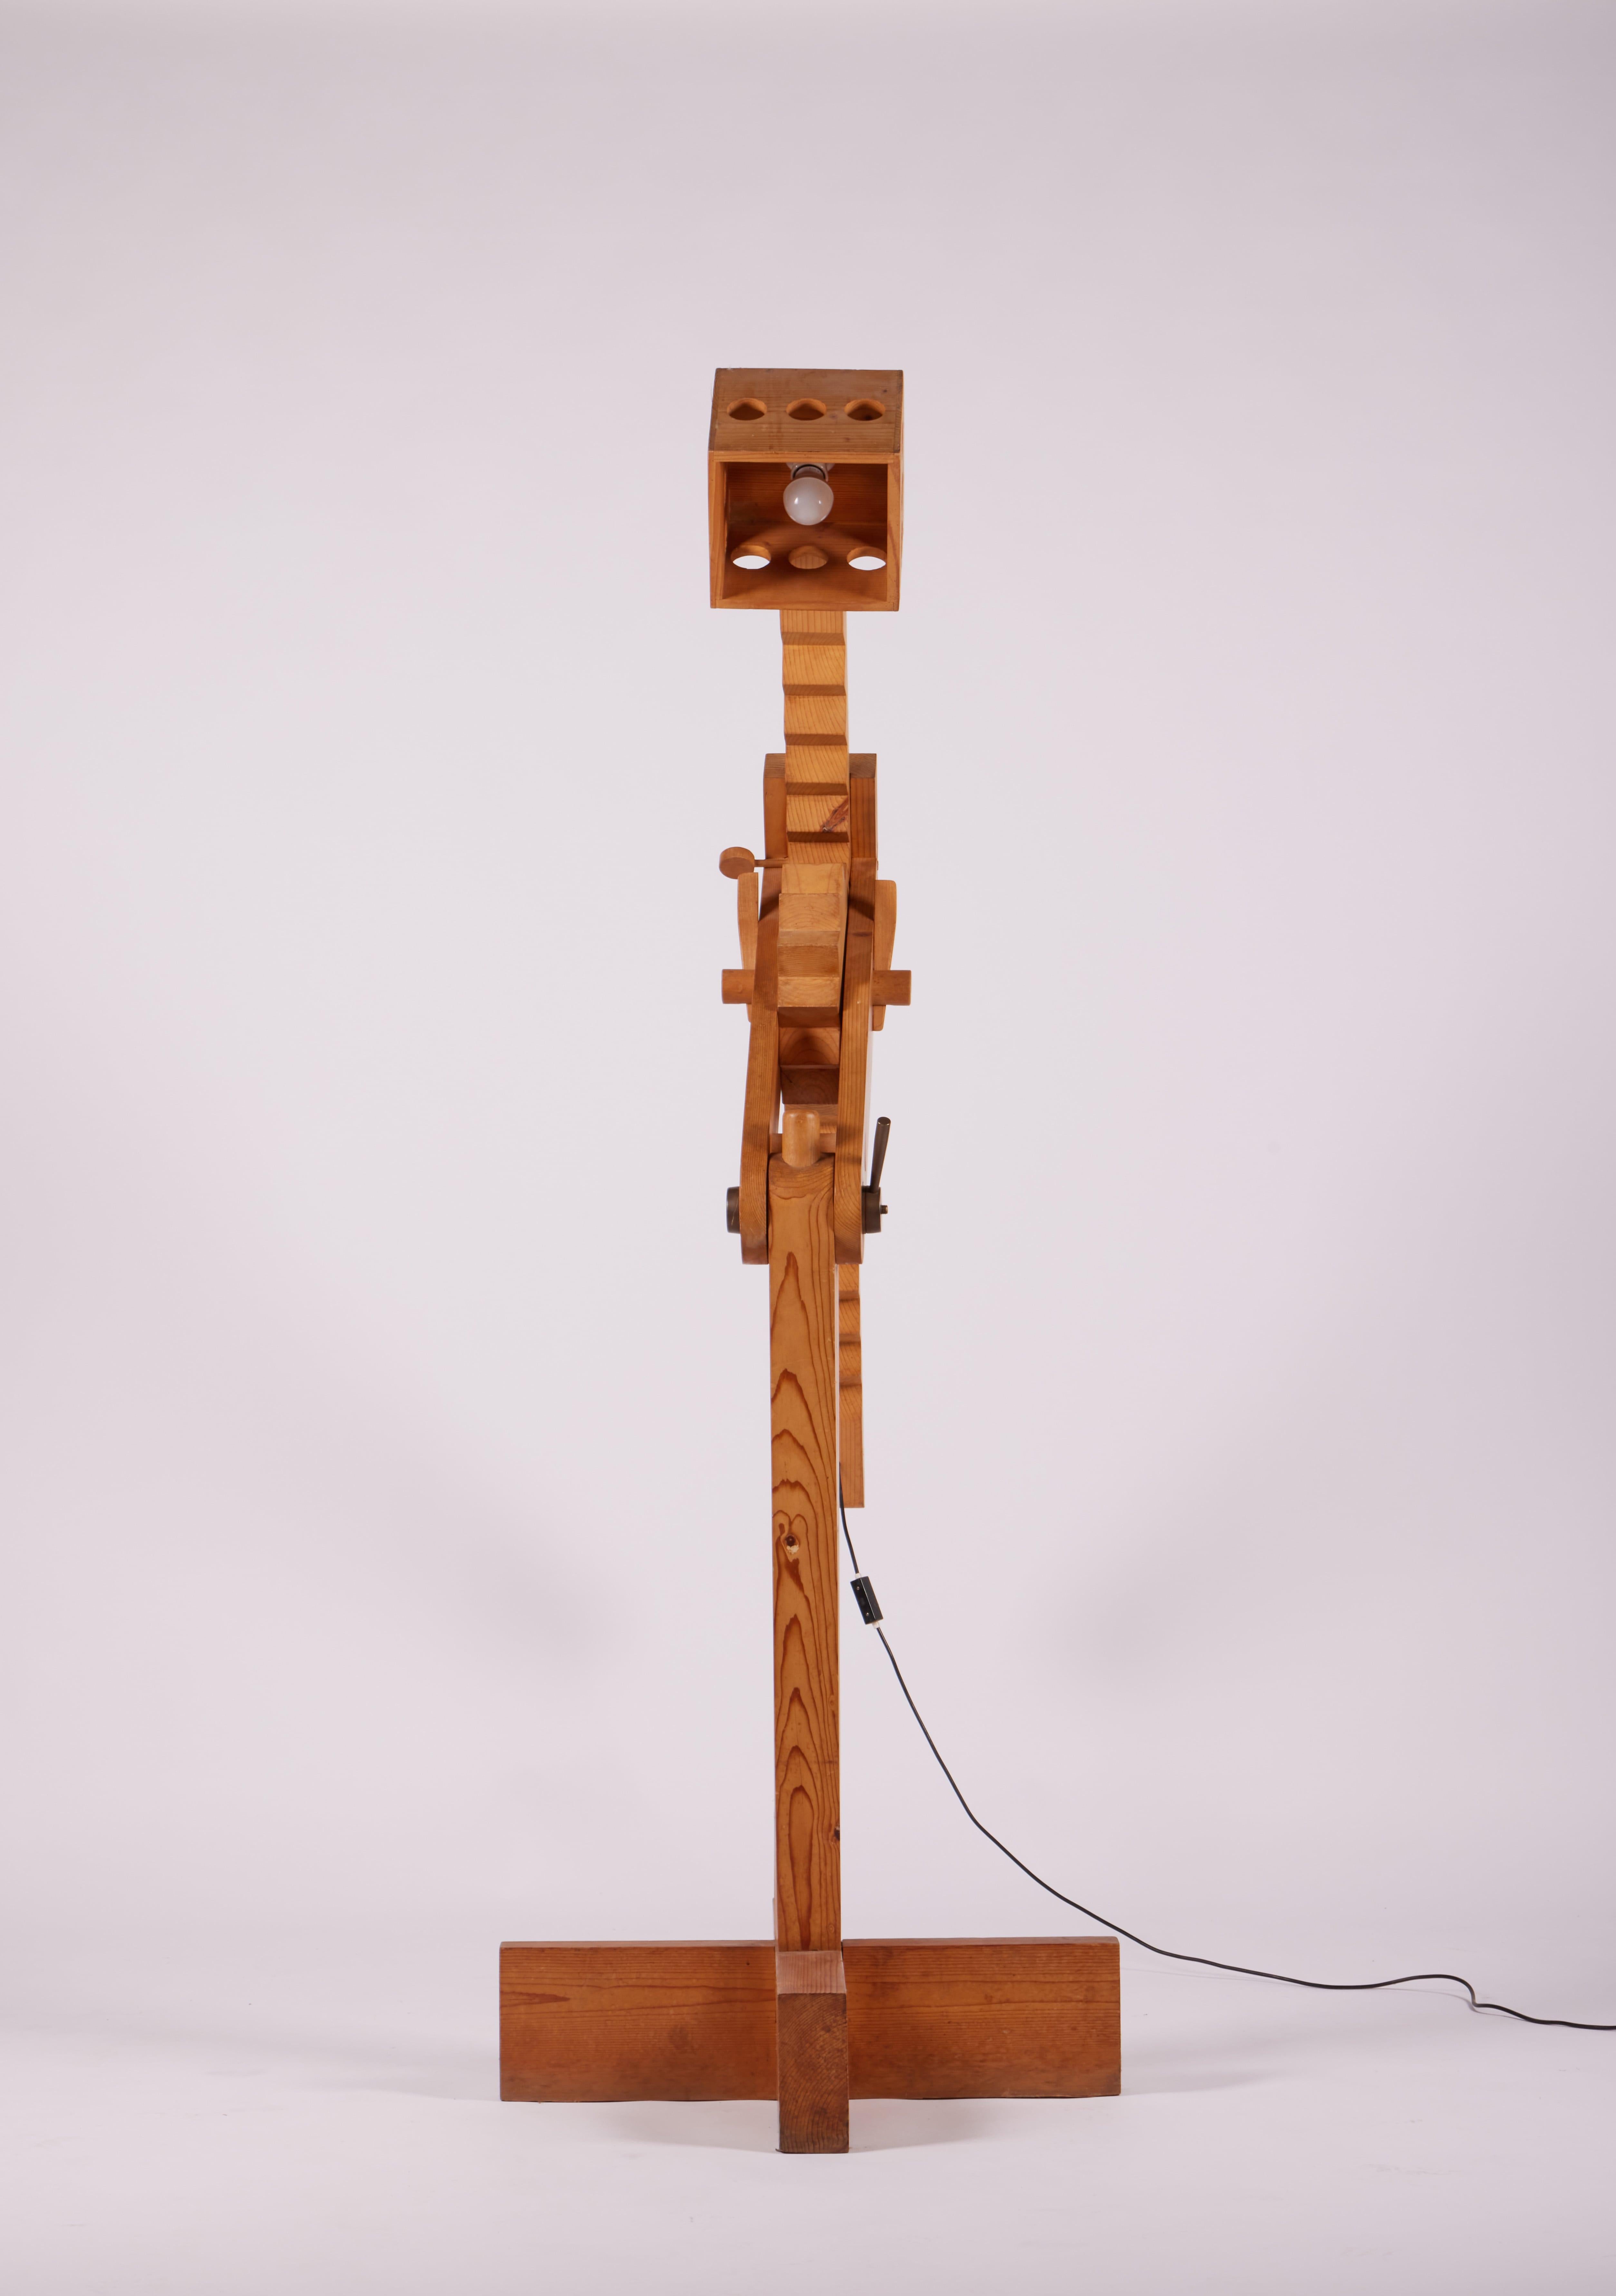 Rare Pinocchio Adjustable Midcentury Floor Lamp in Pine for Reflo, Italy 1972 In Good Condition For Sale In Milan, IT